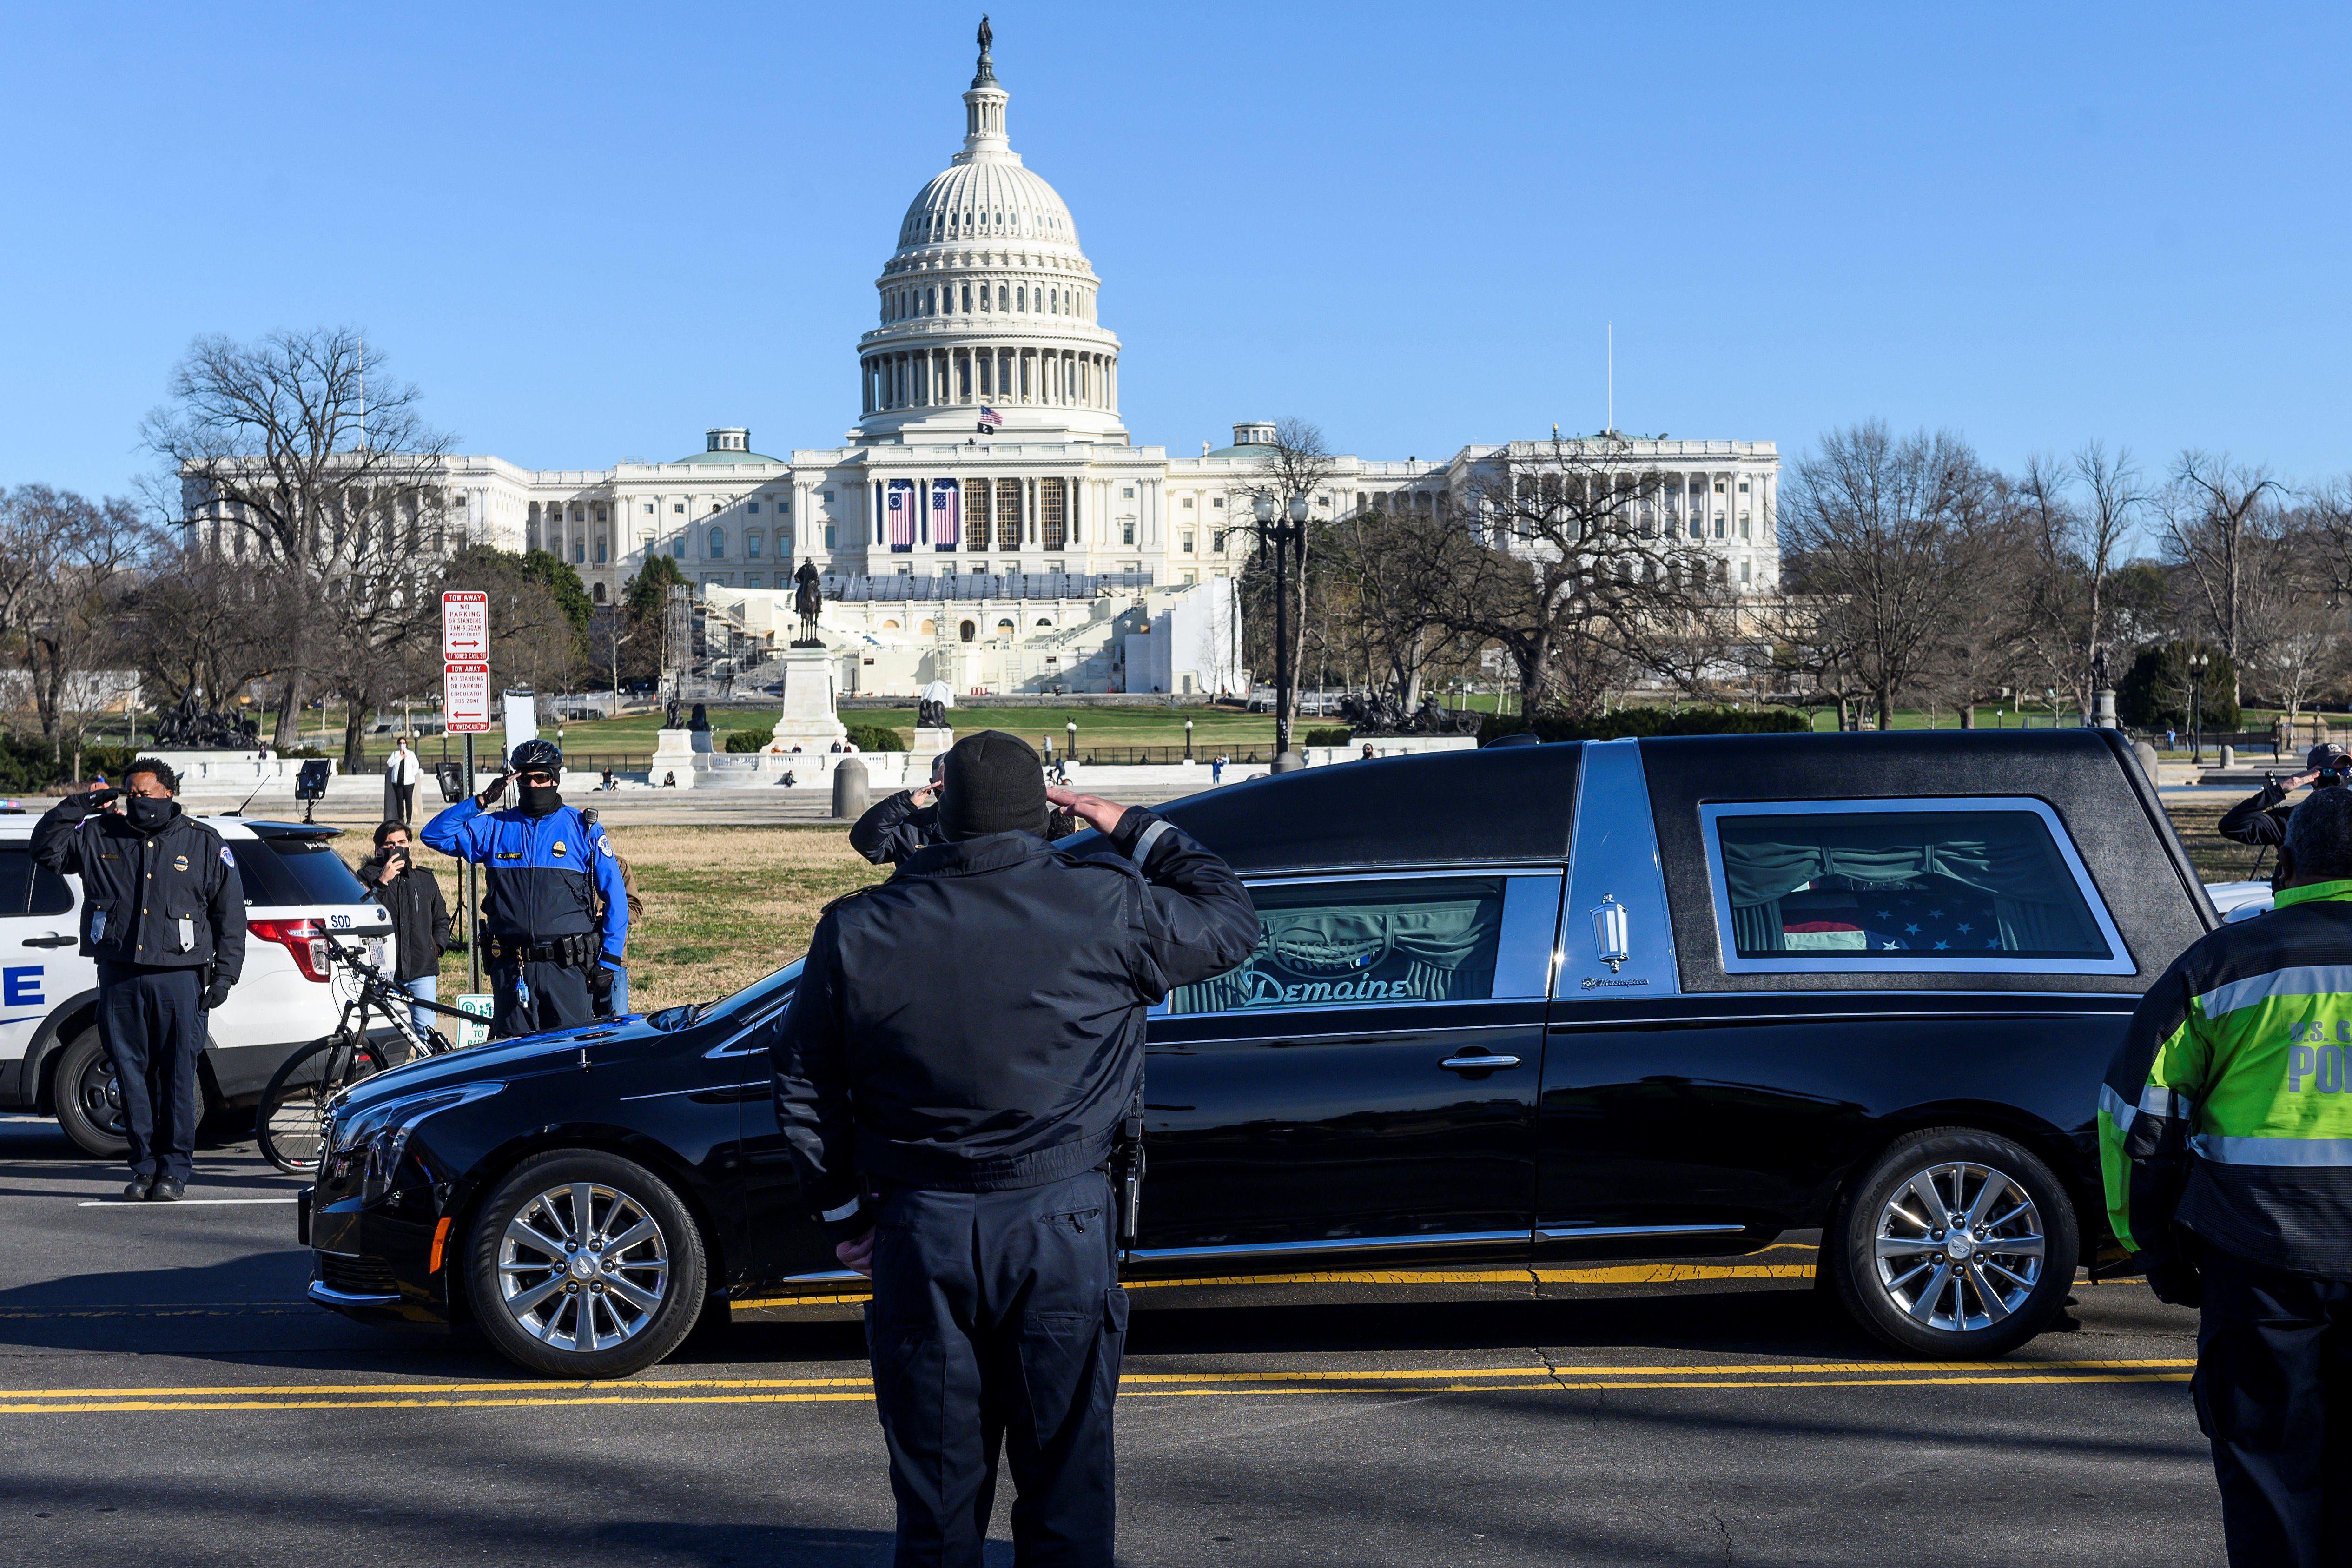 Capitol Police officers salute a hearse passing by on a road in front of the Capitol